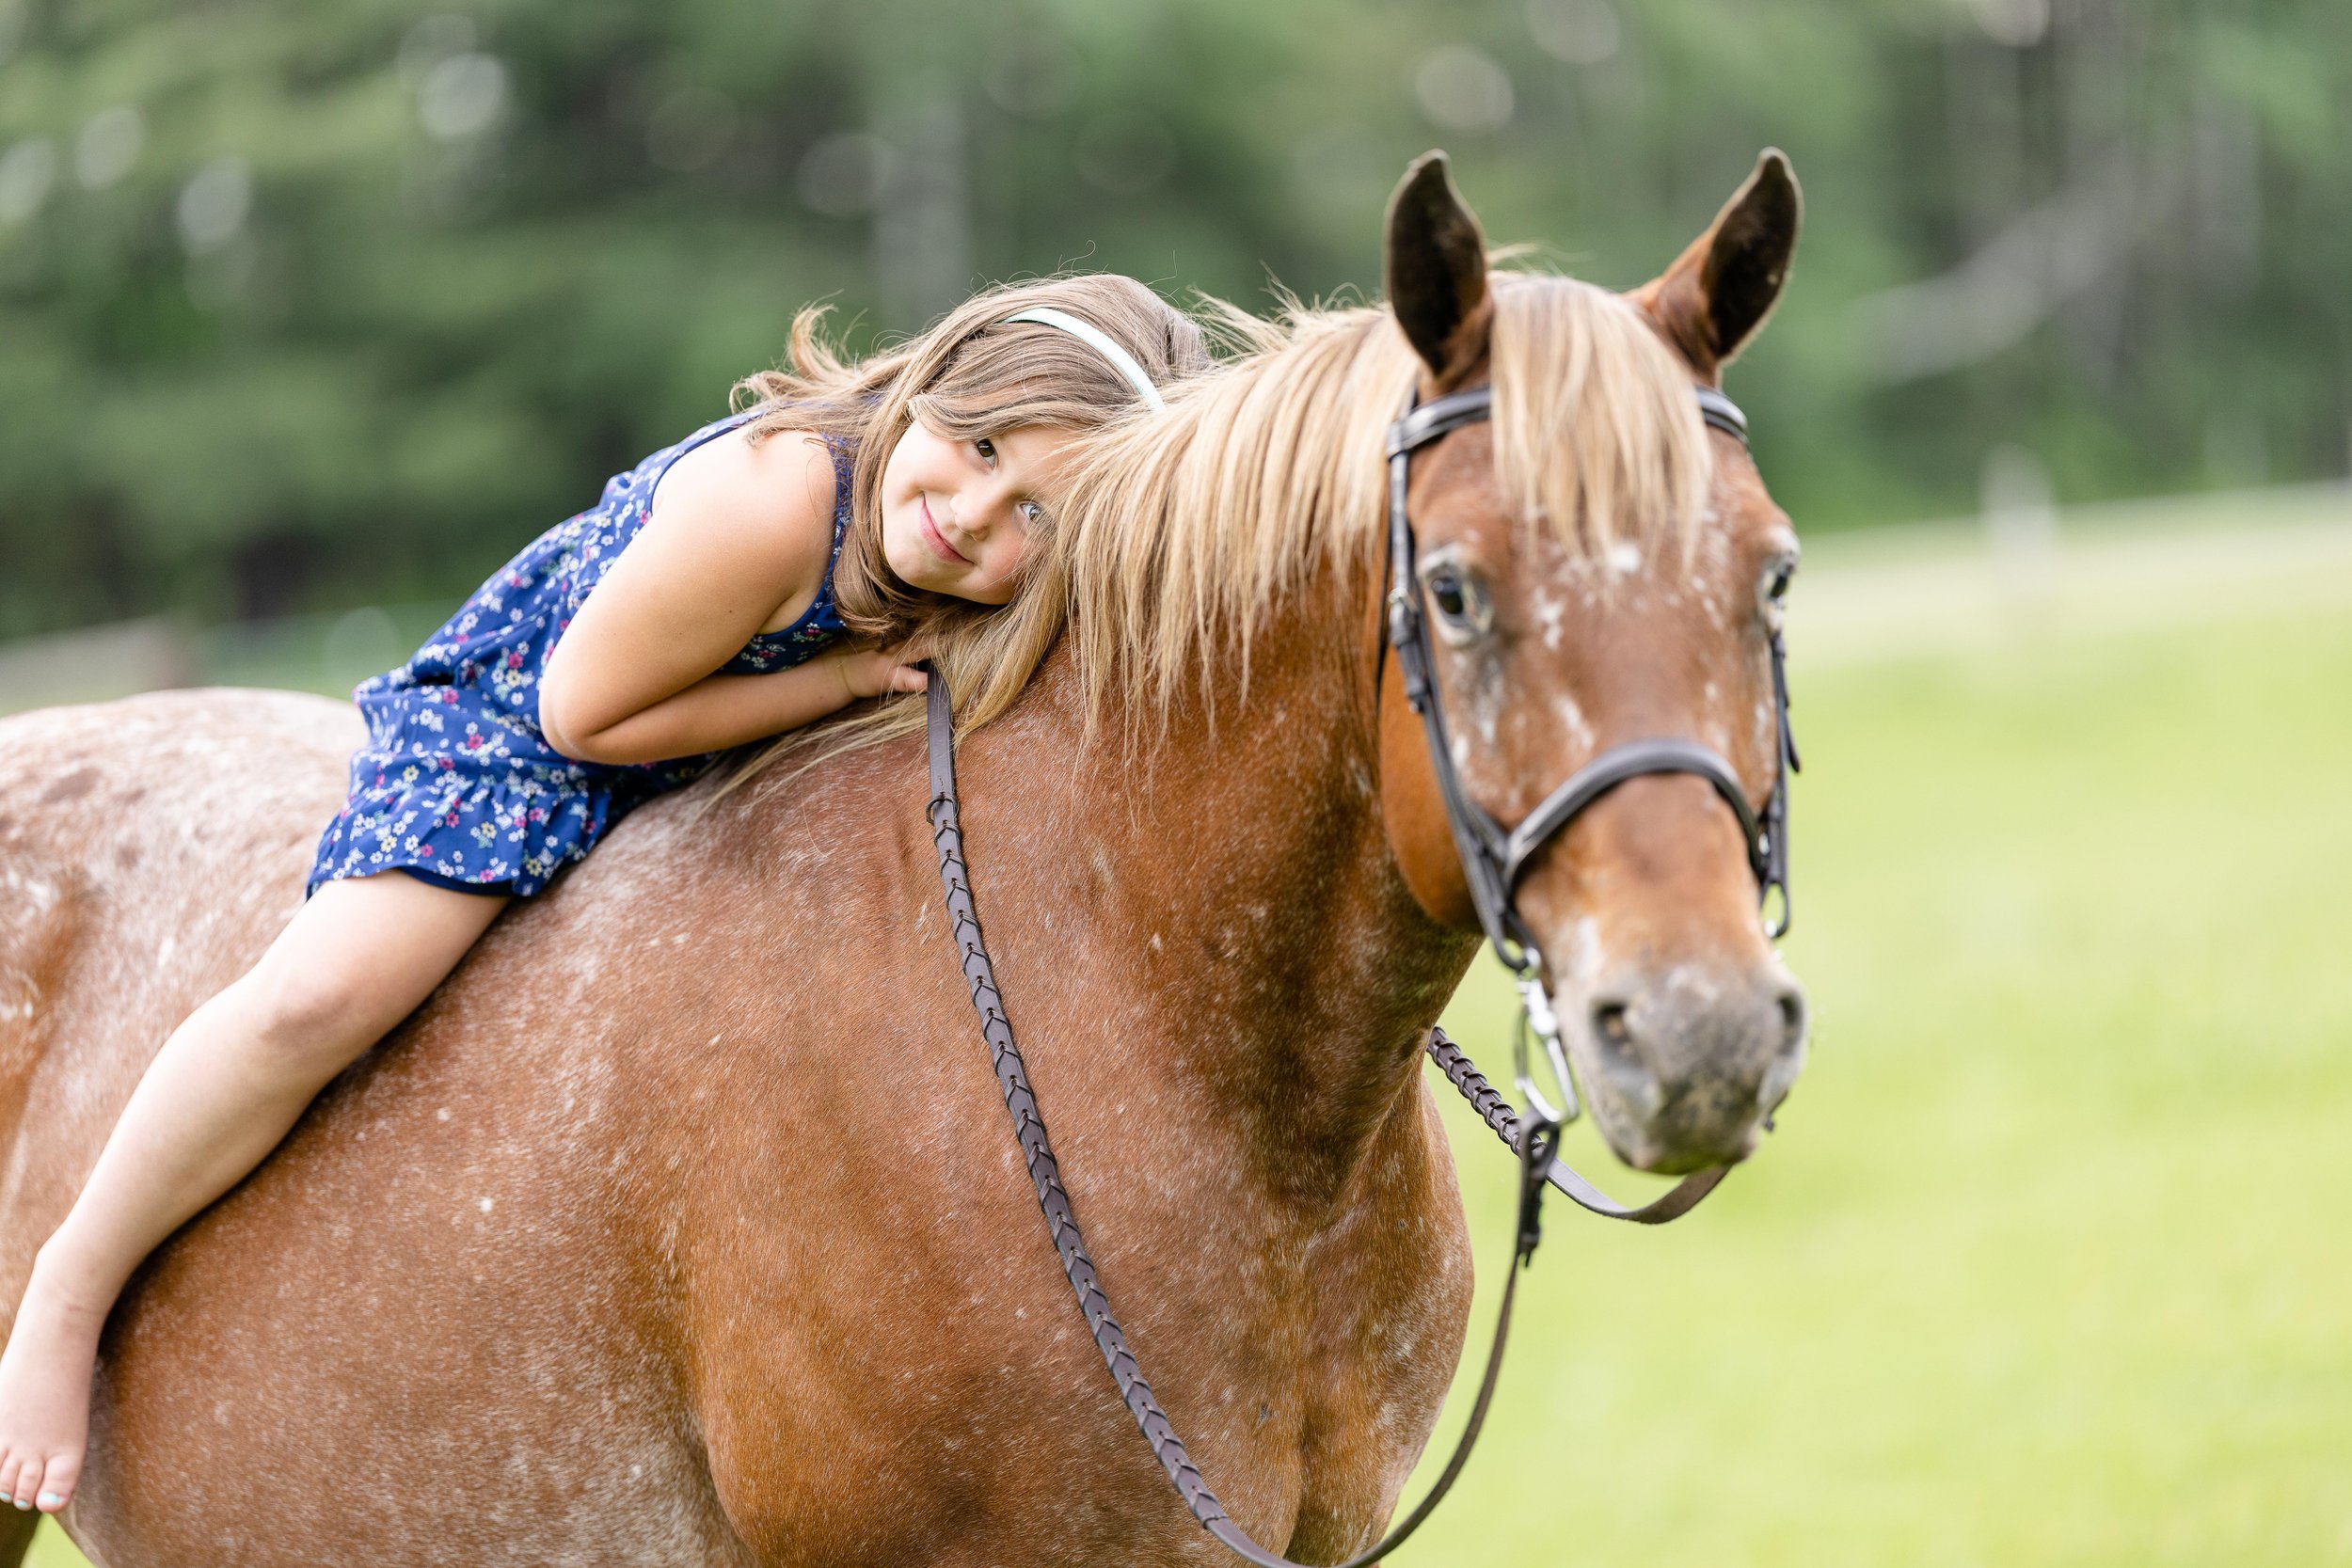 Youth horse and rider photoshoot in Marshfield, WI